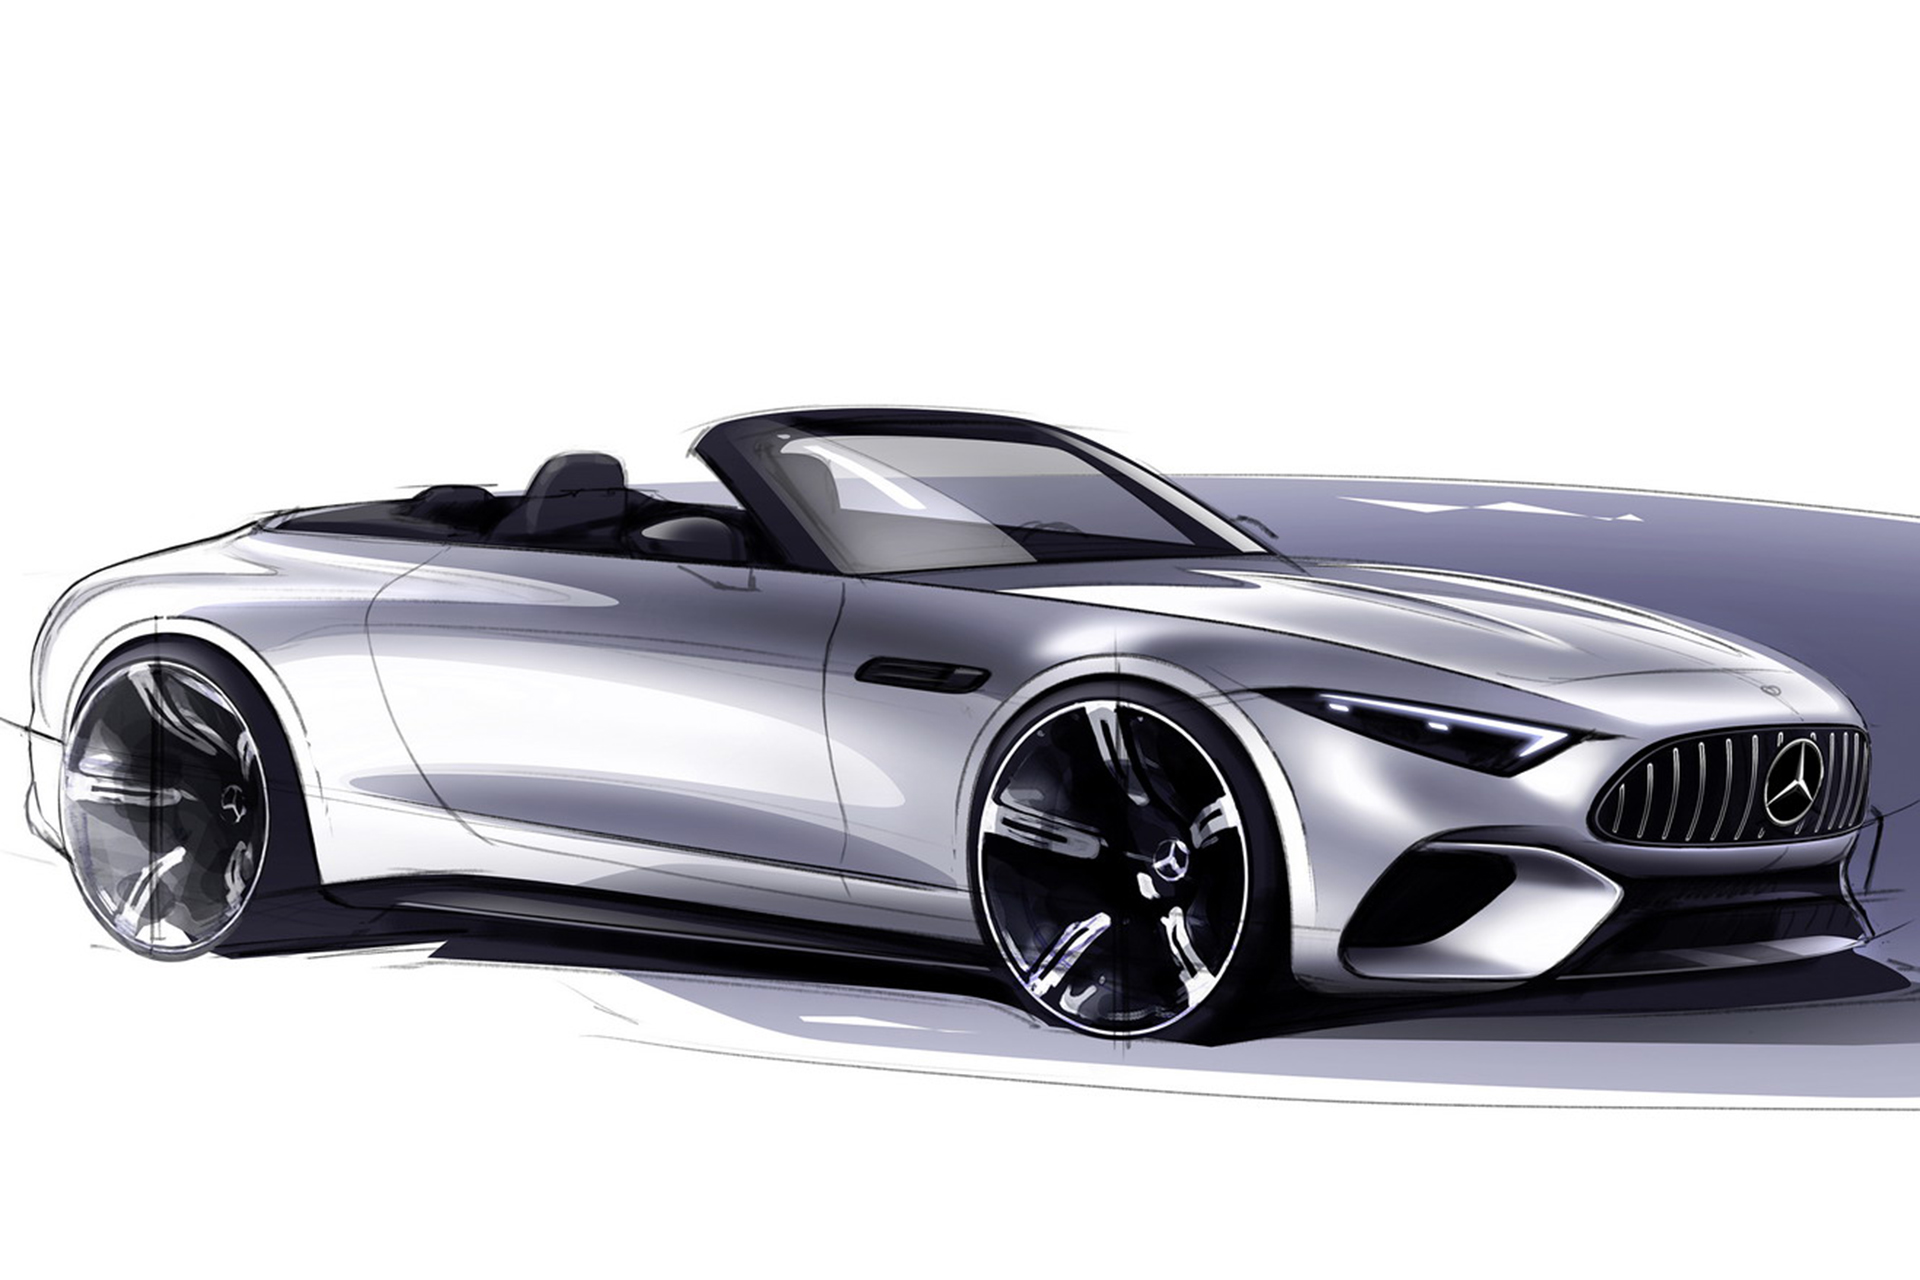 2022 Mercedes-AMG SL 63 4MATIC+ Design Sketch Wallpapers #94 of 97